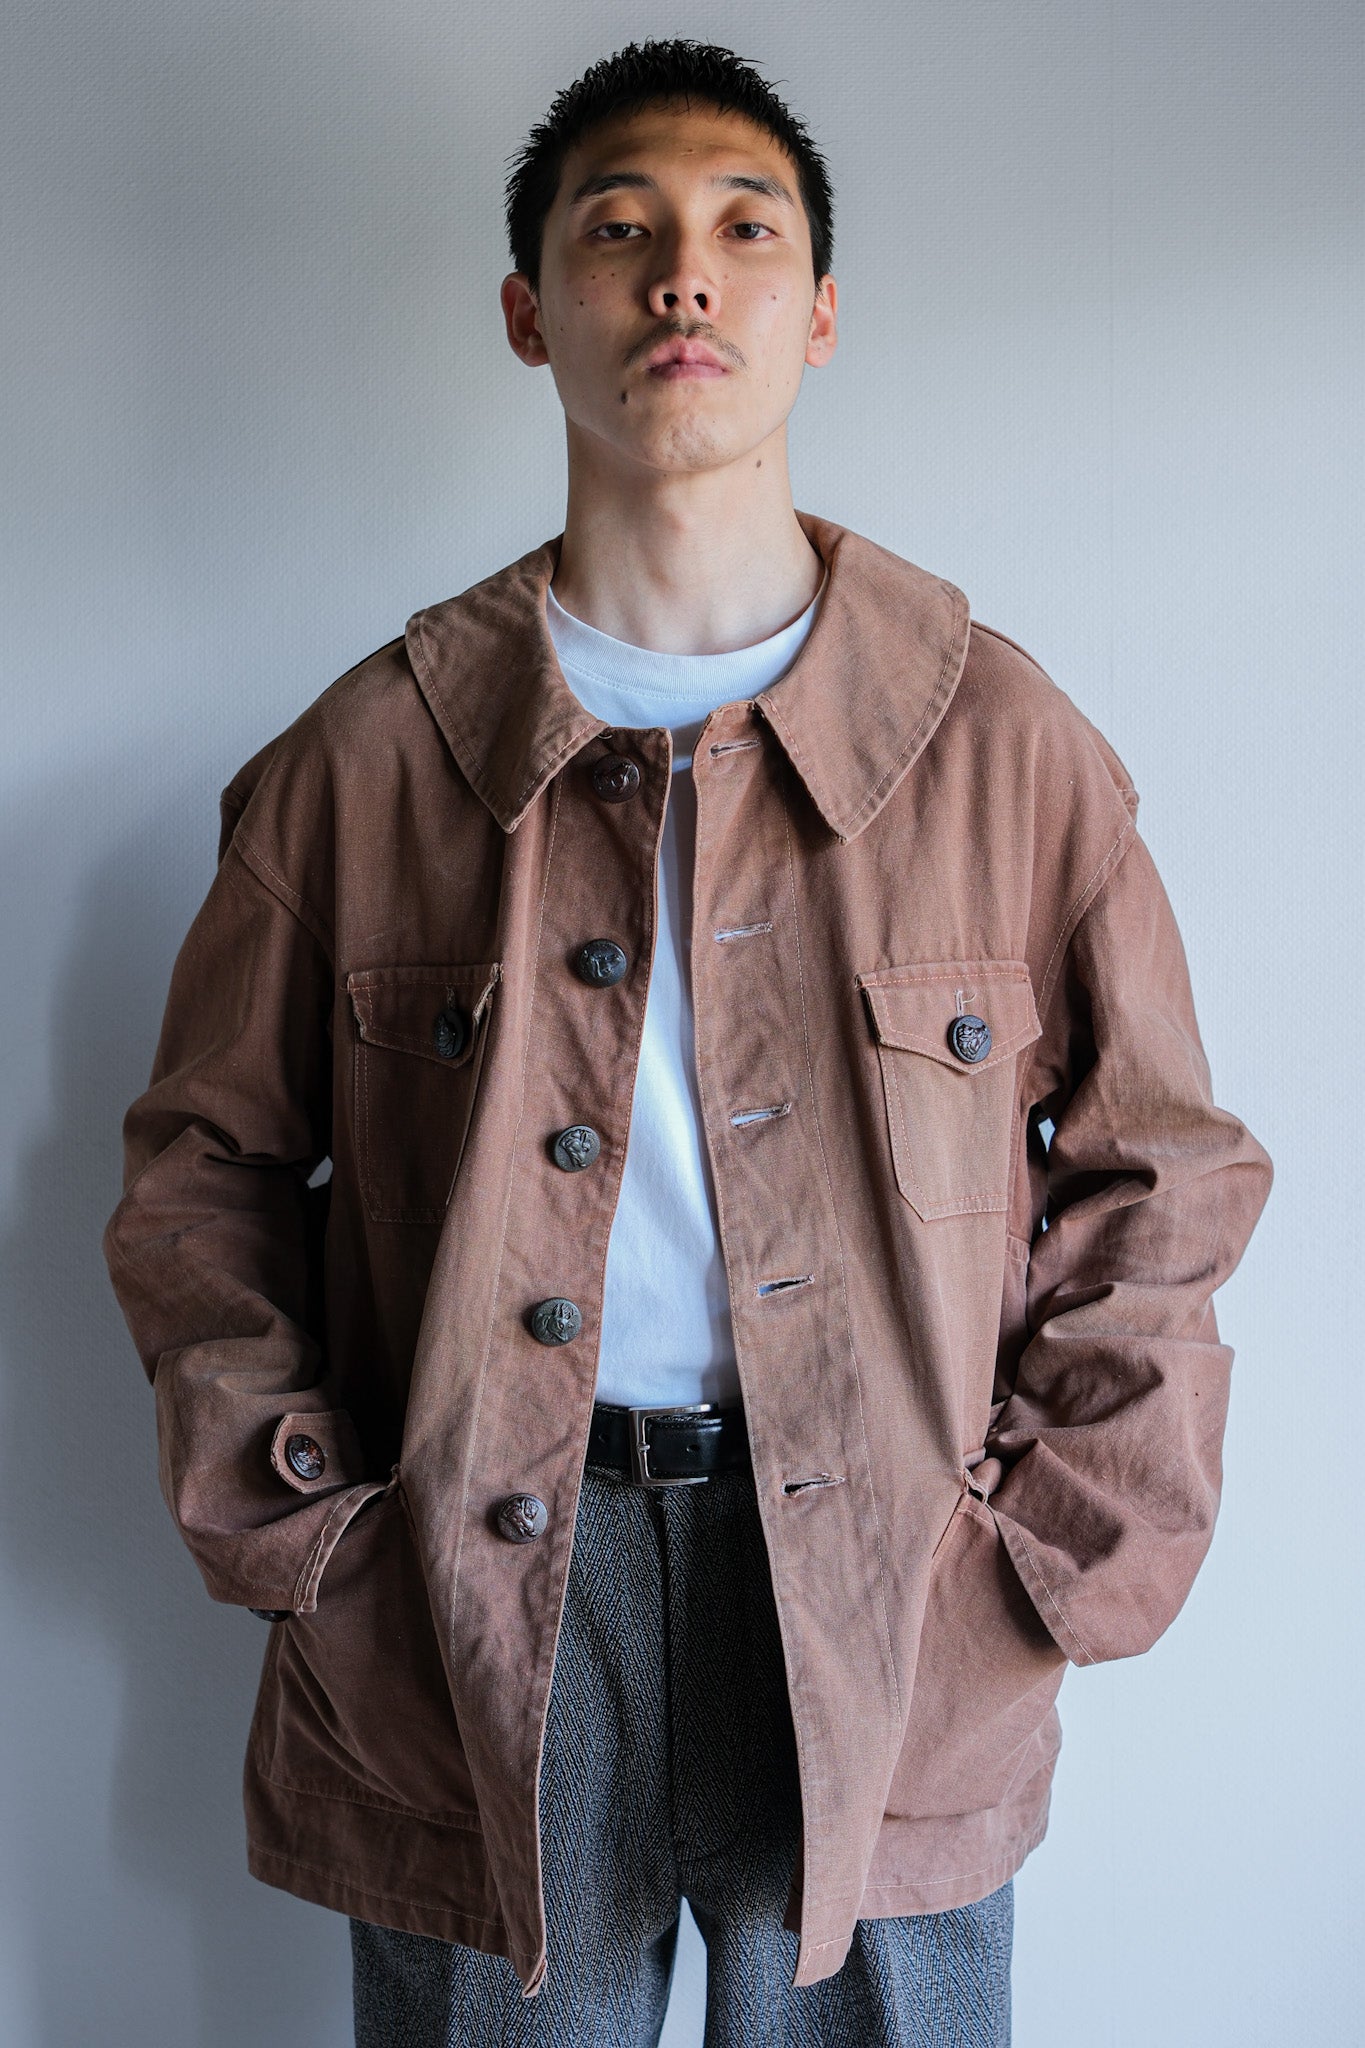 [~ 40's] French Vintage Reddish Brown Cotton Canvas Hunting Jacket